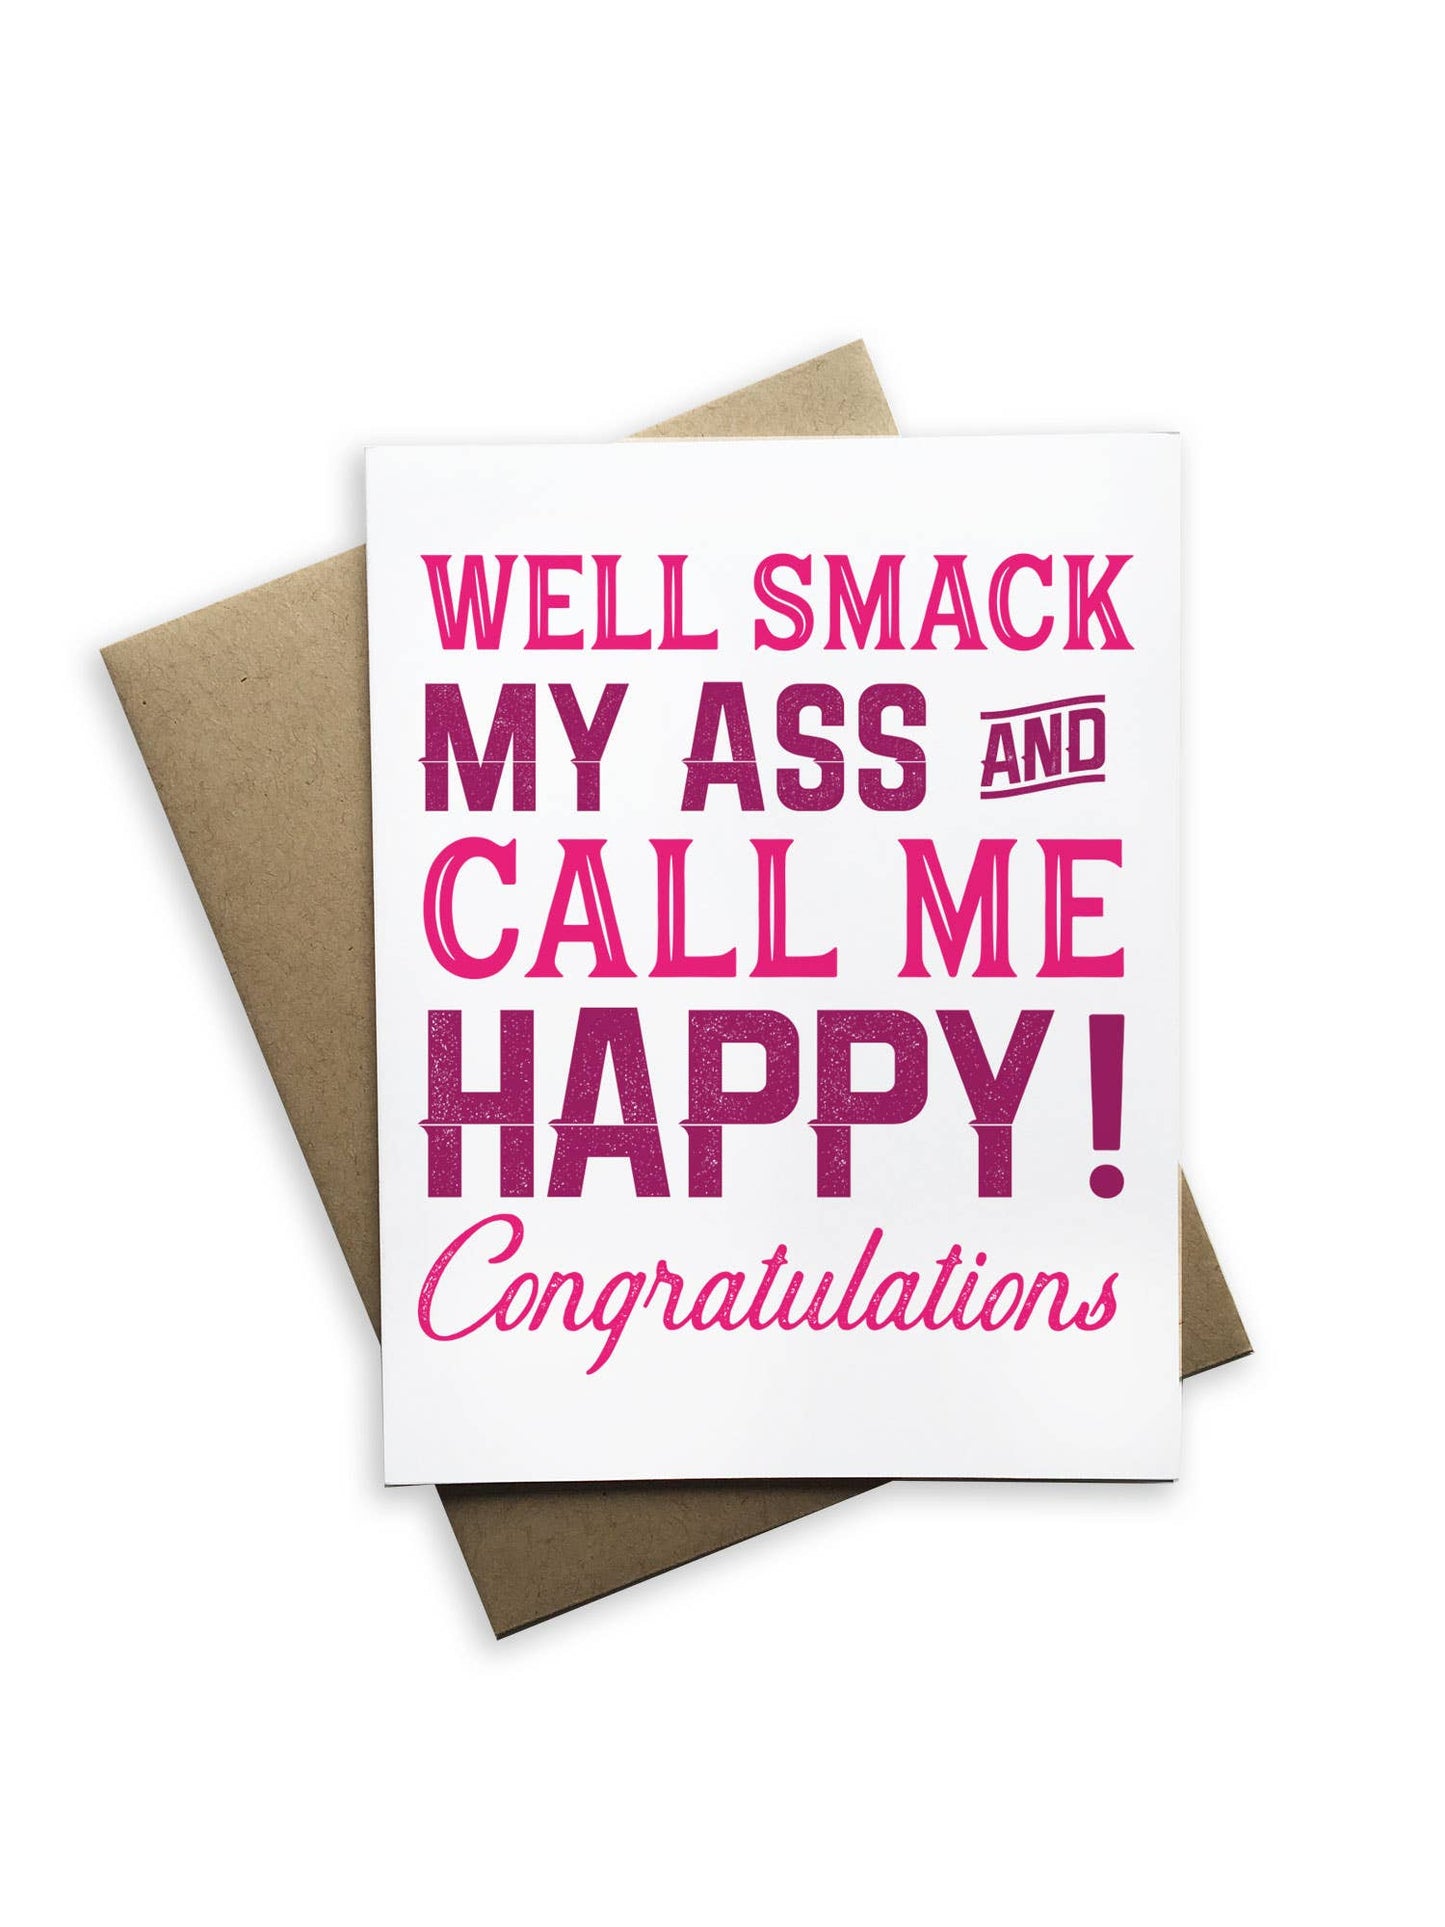 Well Smack My Ass and Call Me Happy Congratulations Card